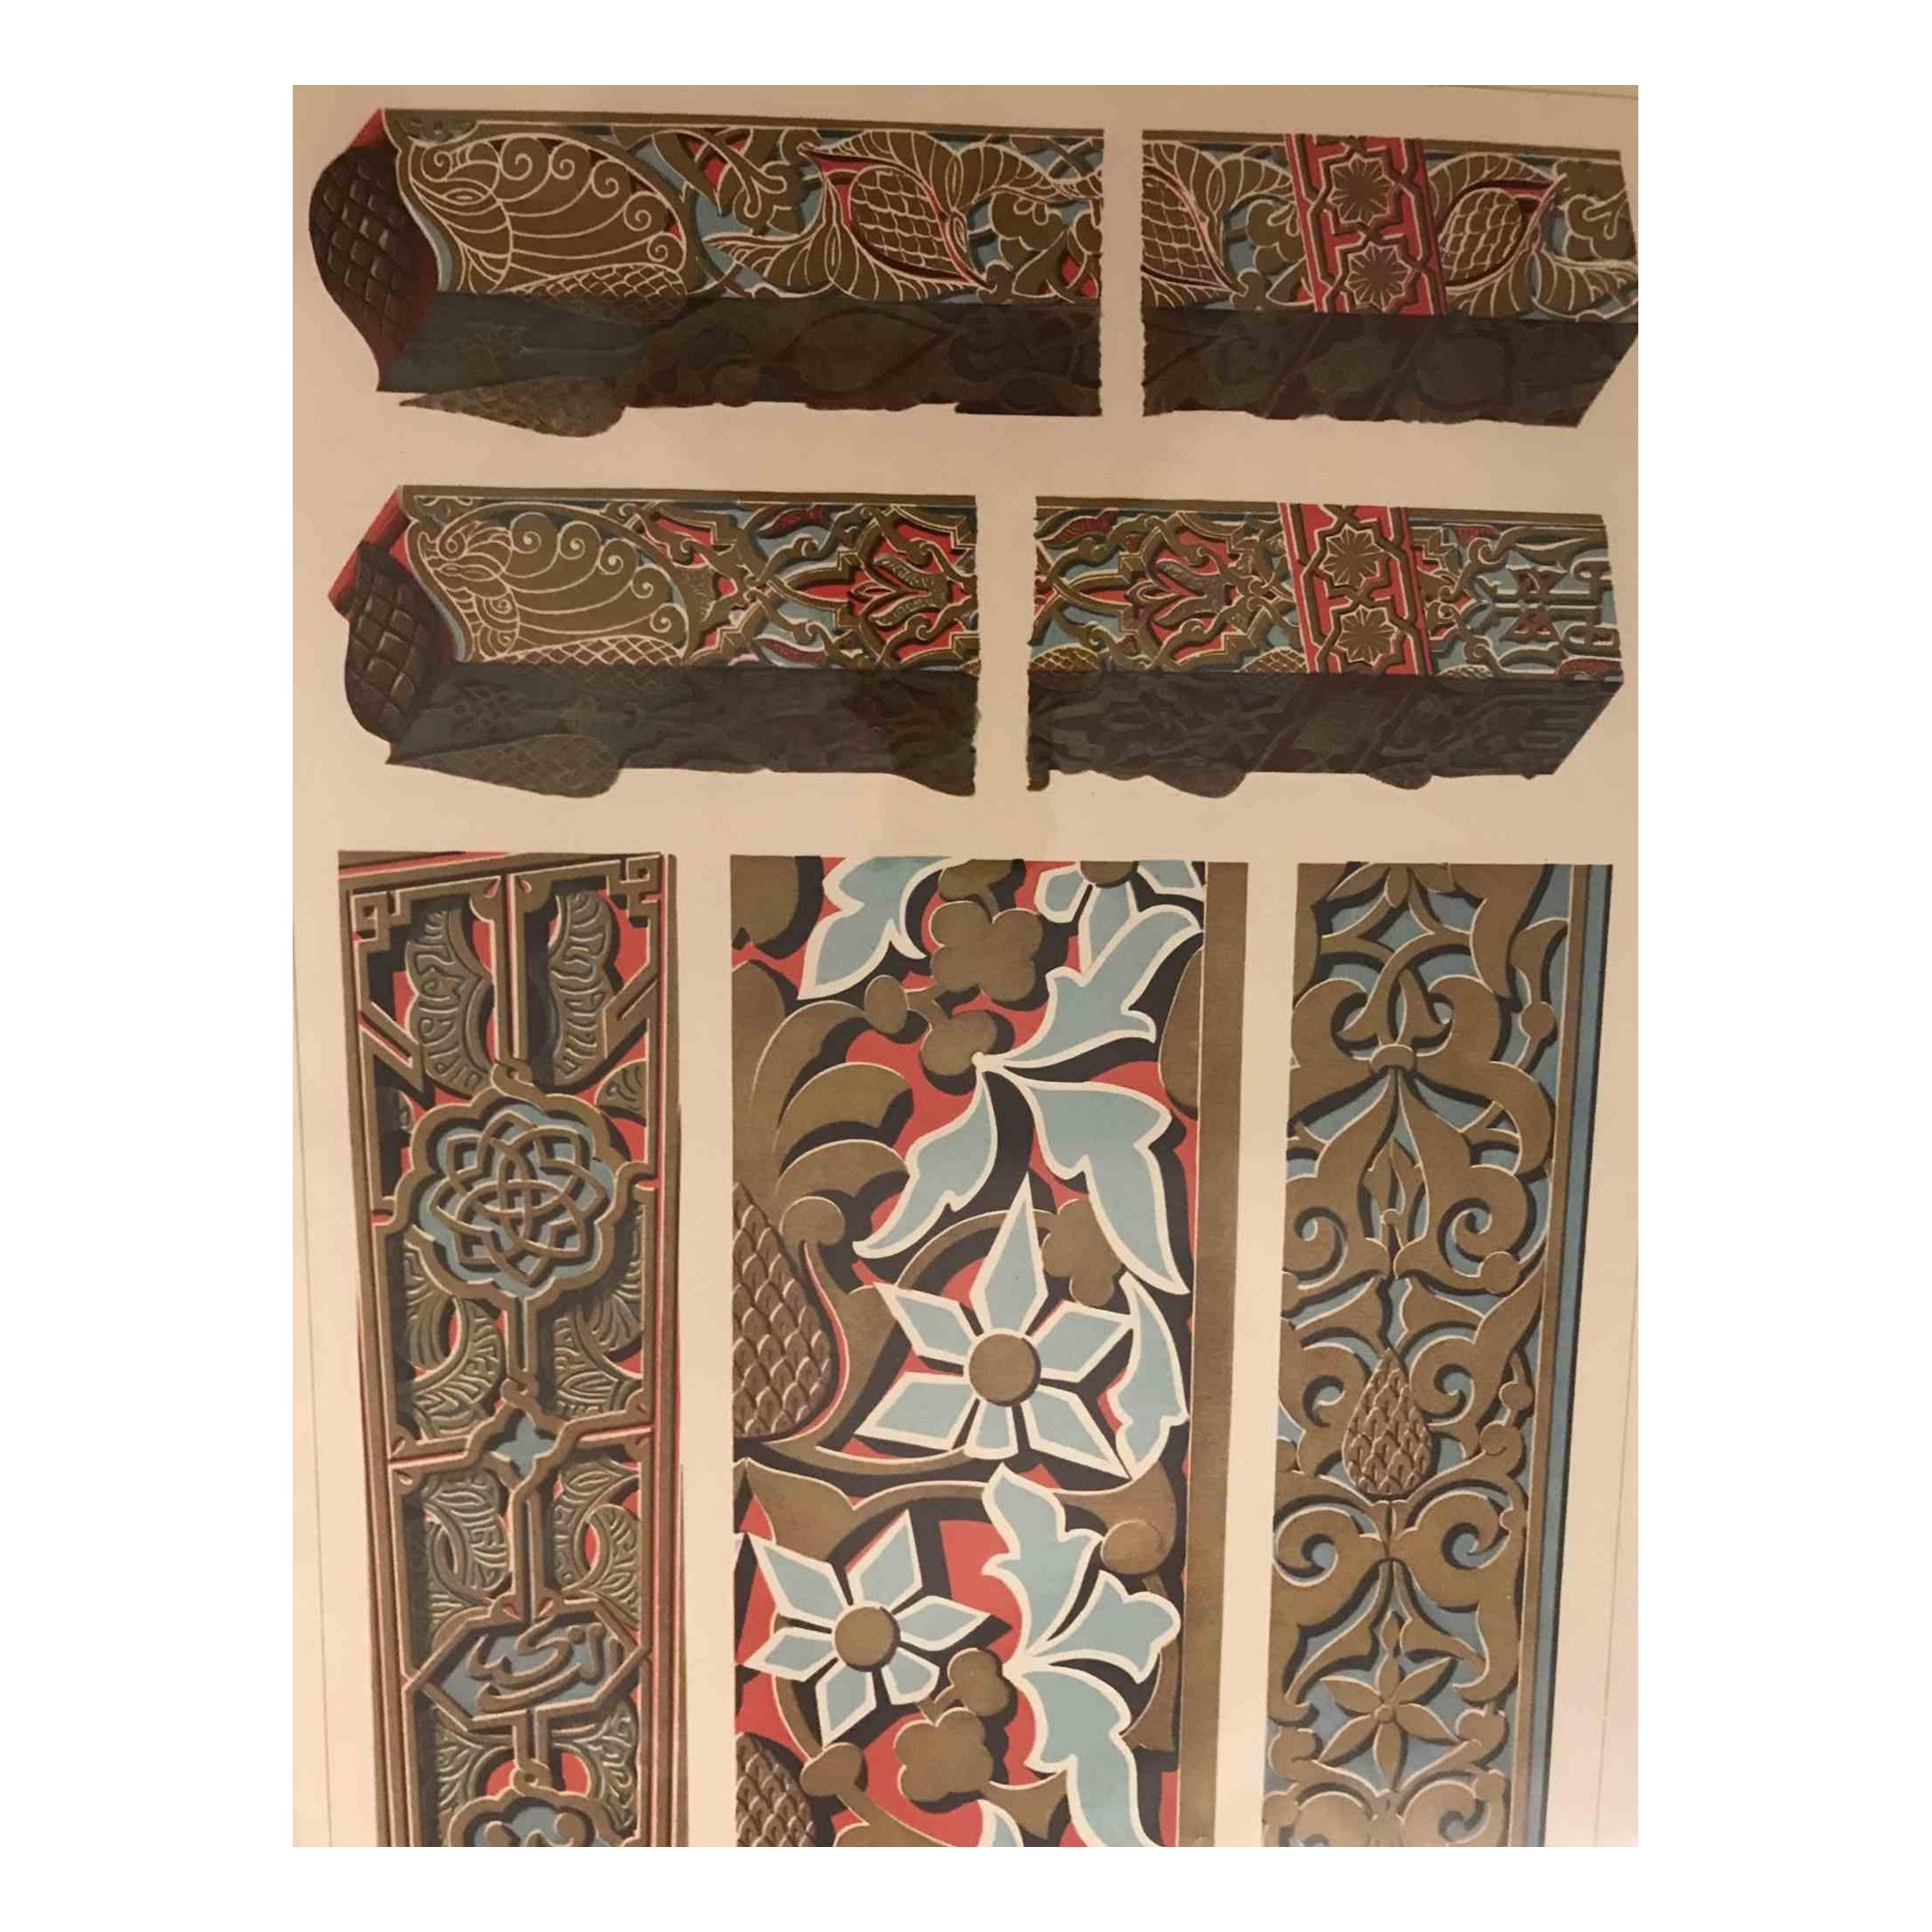 Decorative Motifs - Arabic Style is a print on ivory-colored paper realized by  A. Alessio in the  early 20th Century

Vintage Chromolithograph.

Very good conditions.

The artwork represents Decorative motifs through well-defined details with vivid